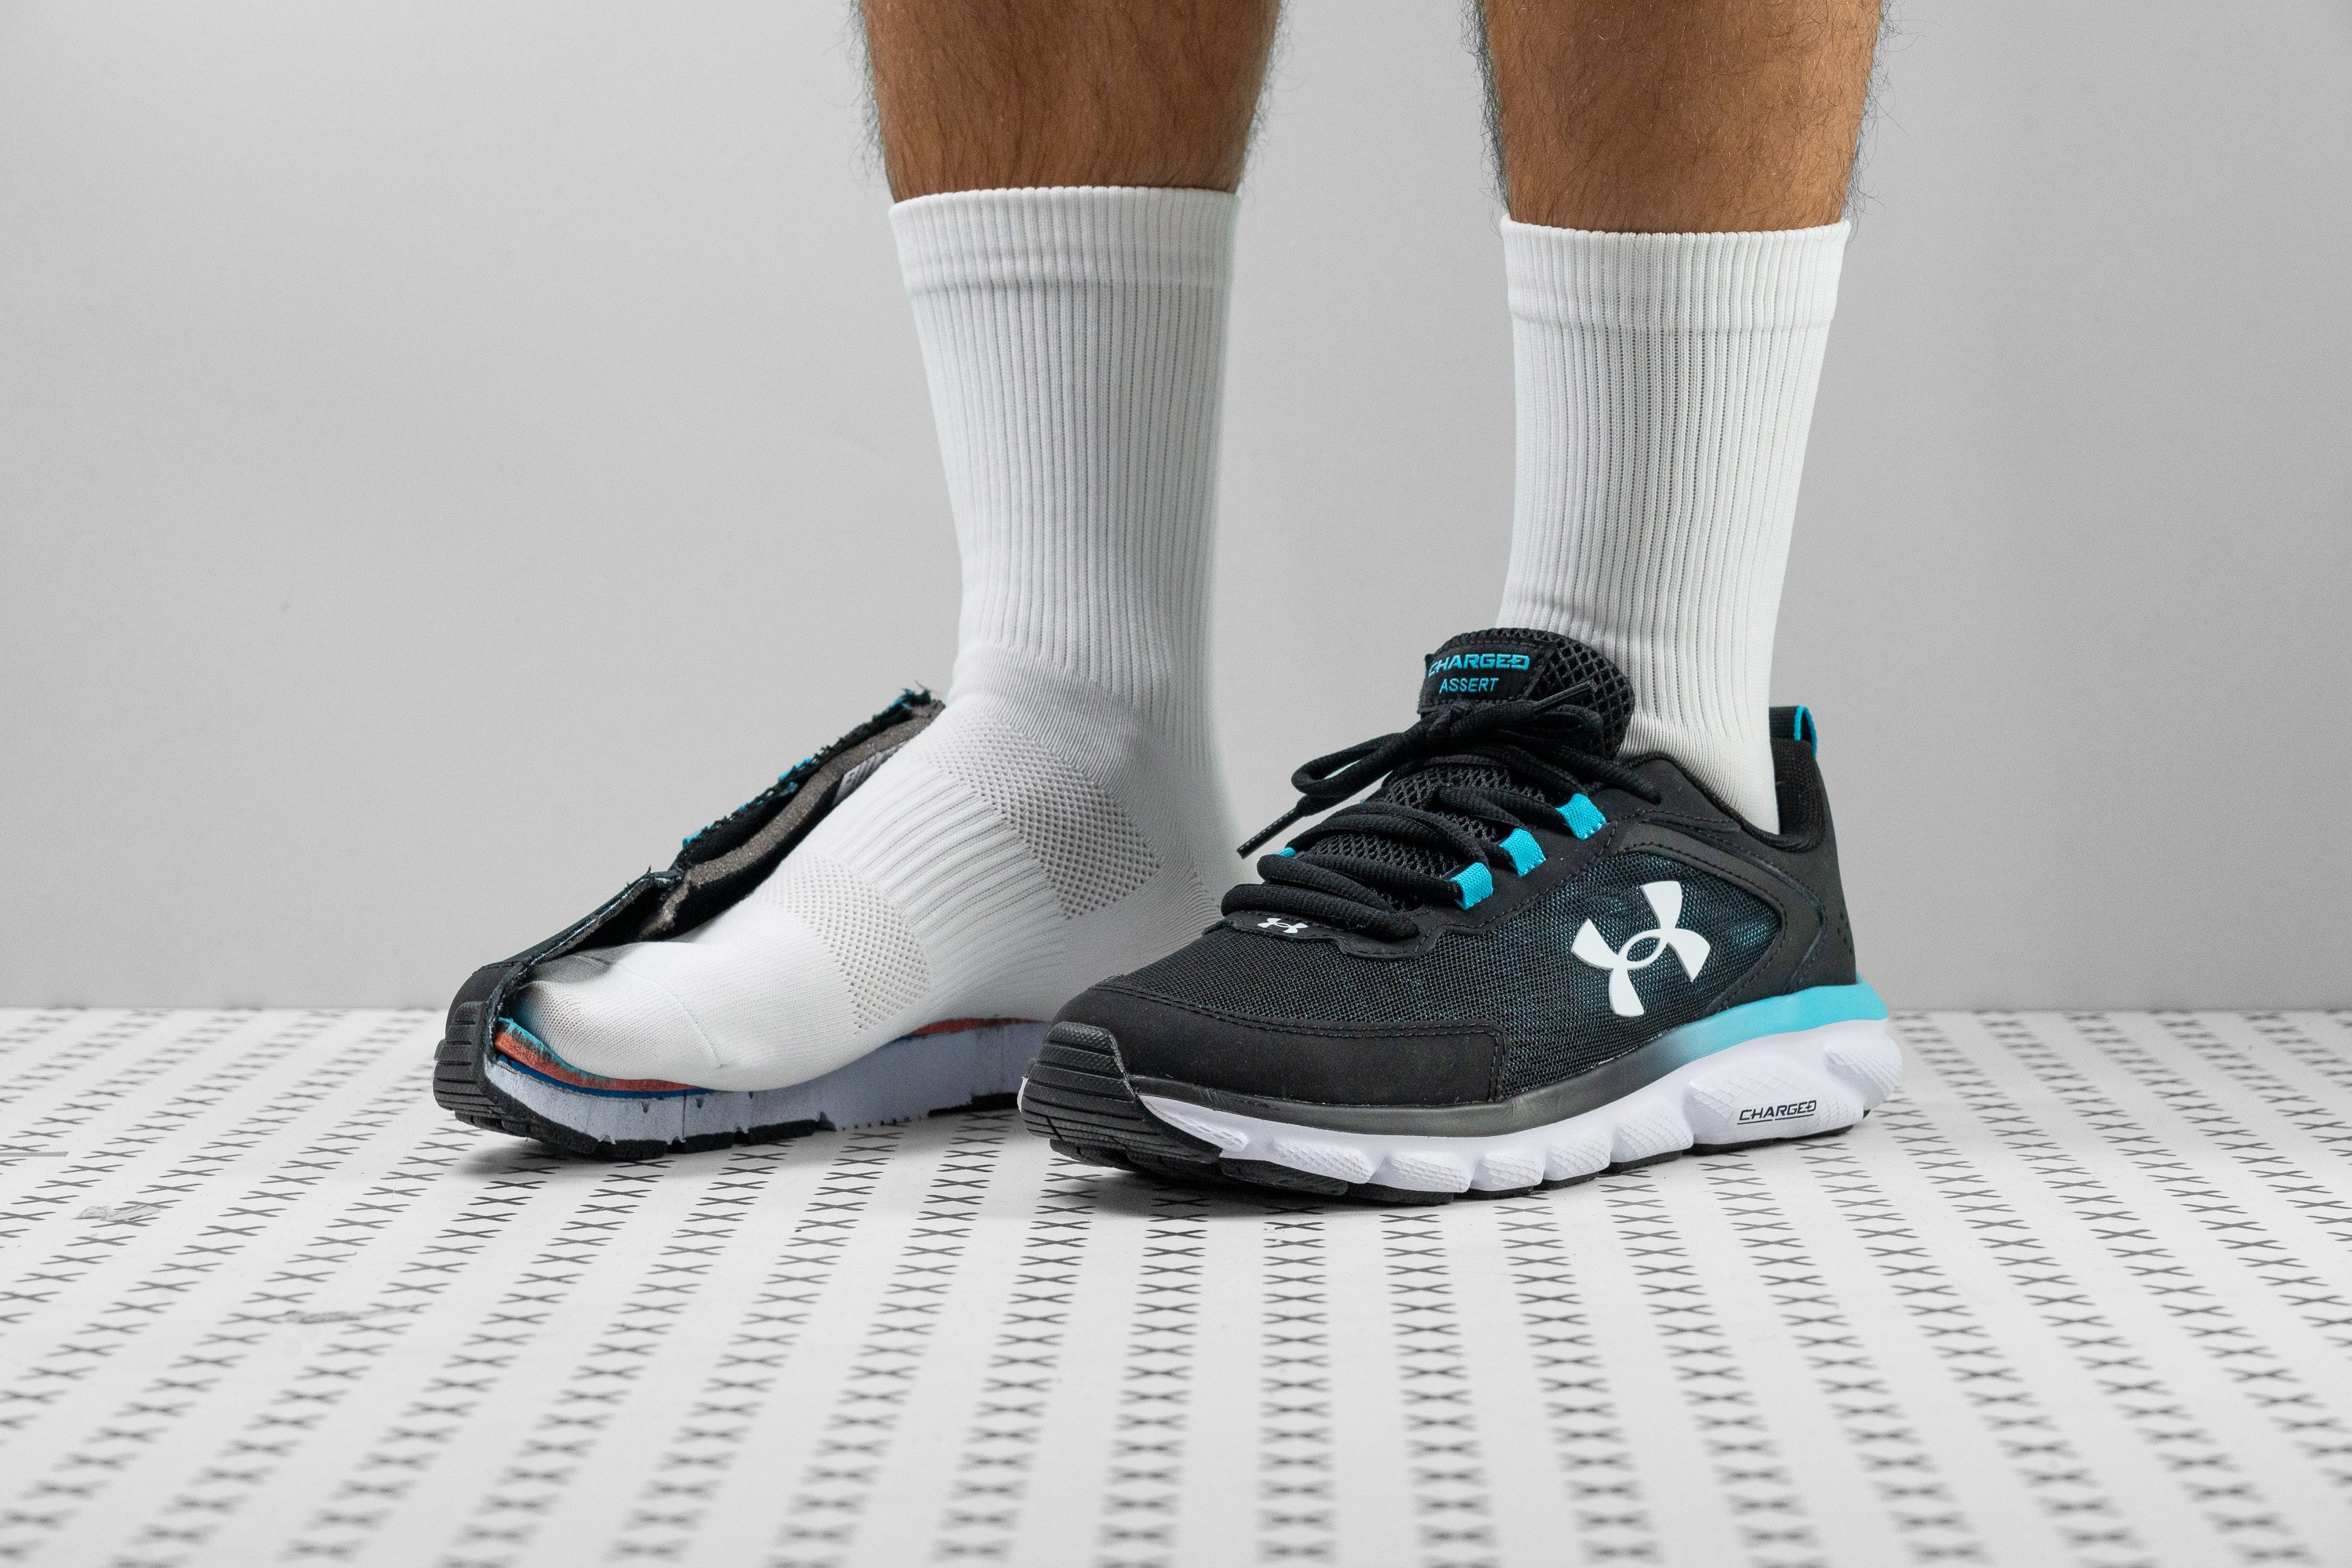 Under Armour Charged Bandit 2 Review - Believe in the Run